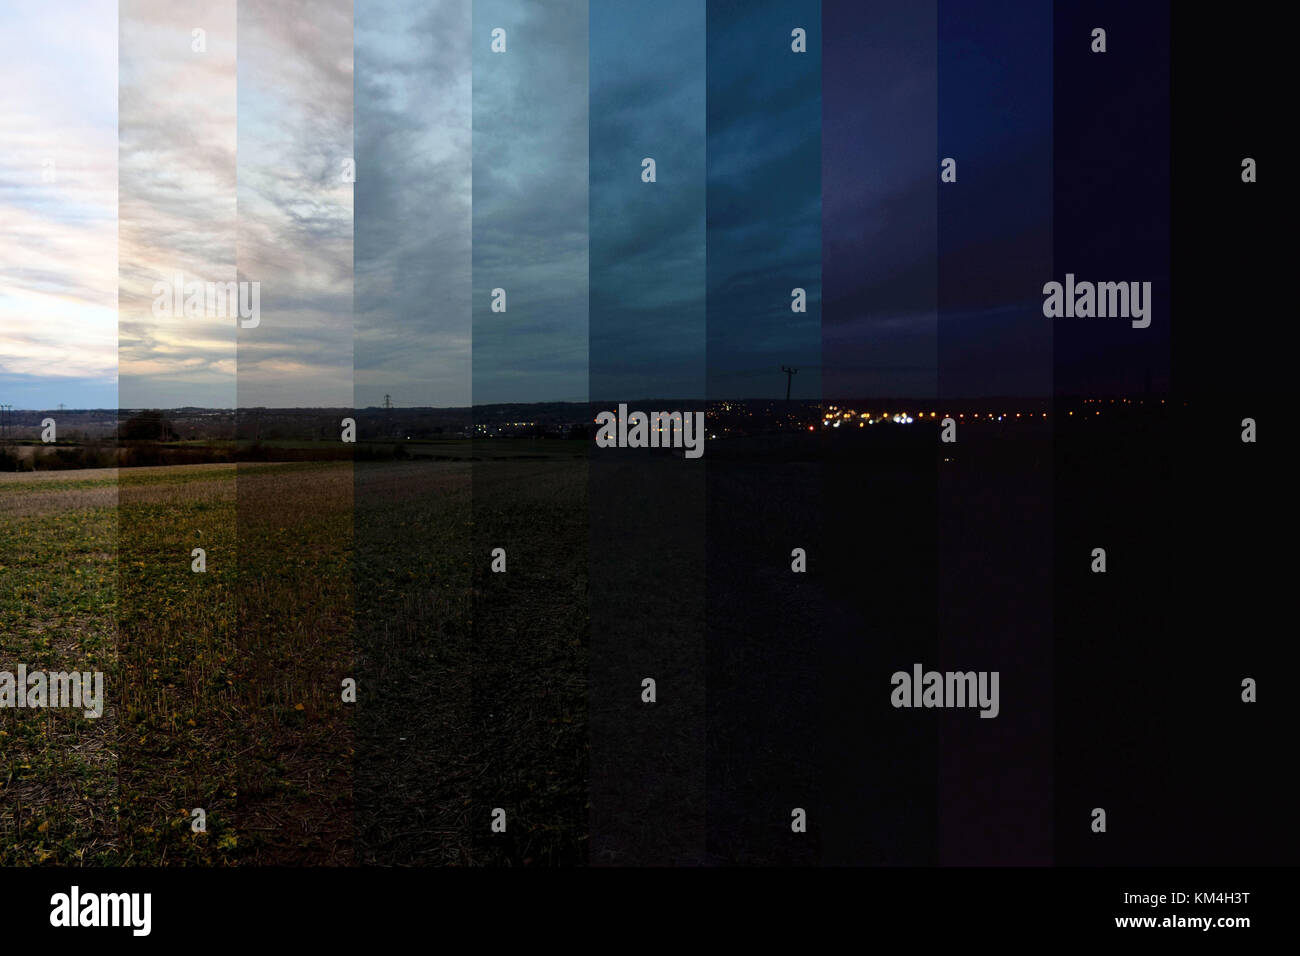 A time-lapse of the sunset over a field shown in gradual 10 minute steps Stock Photo